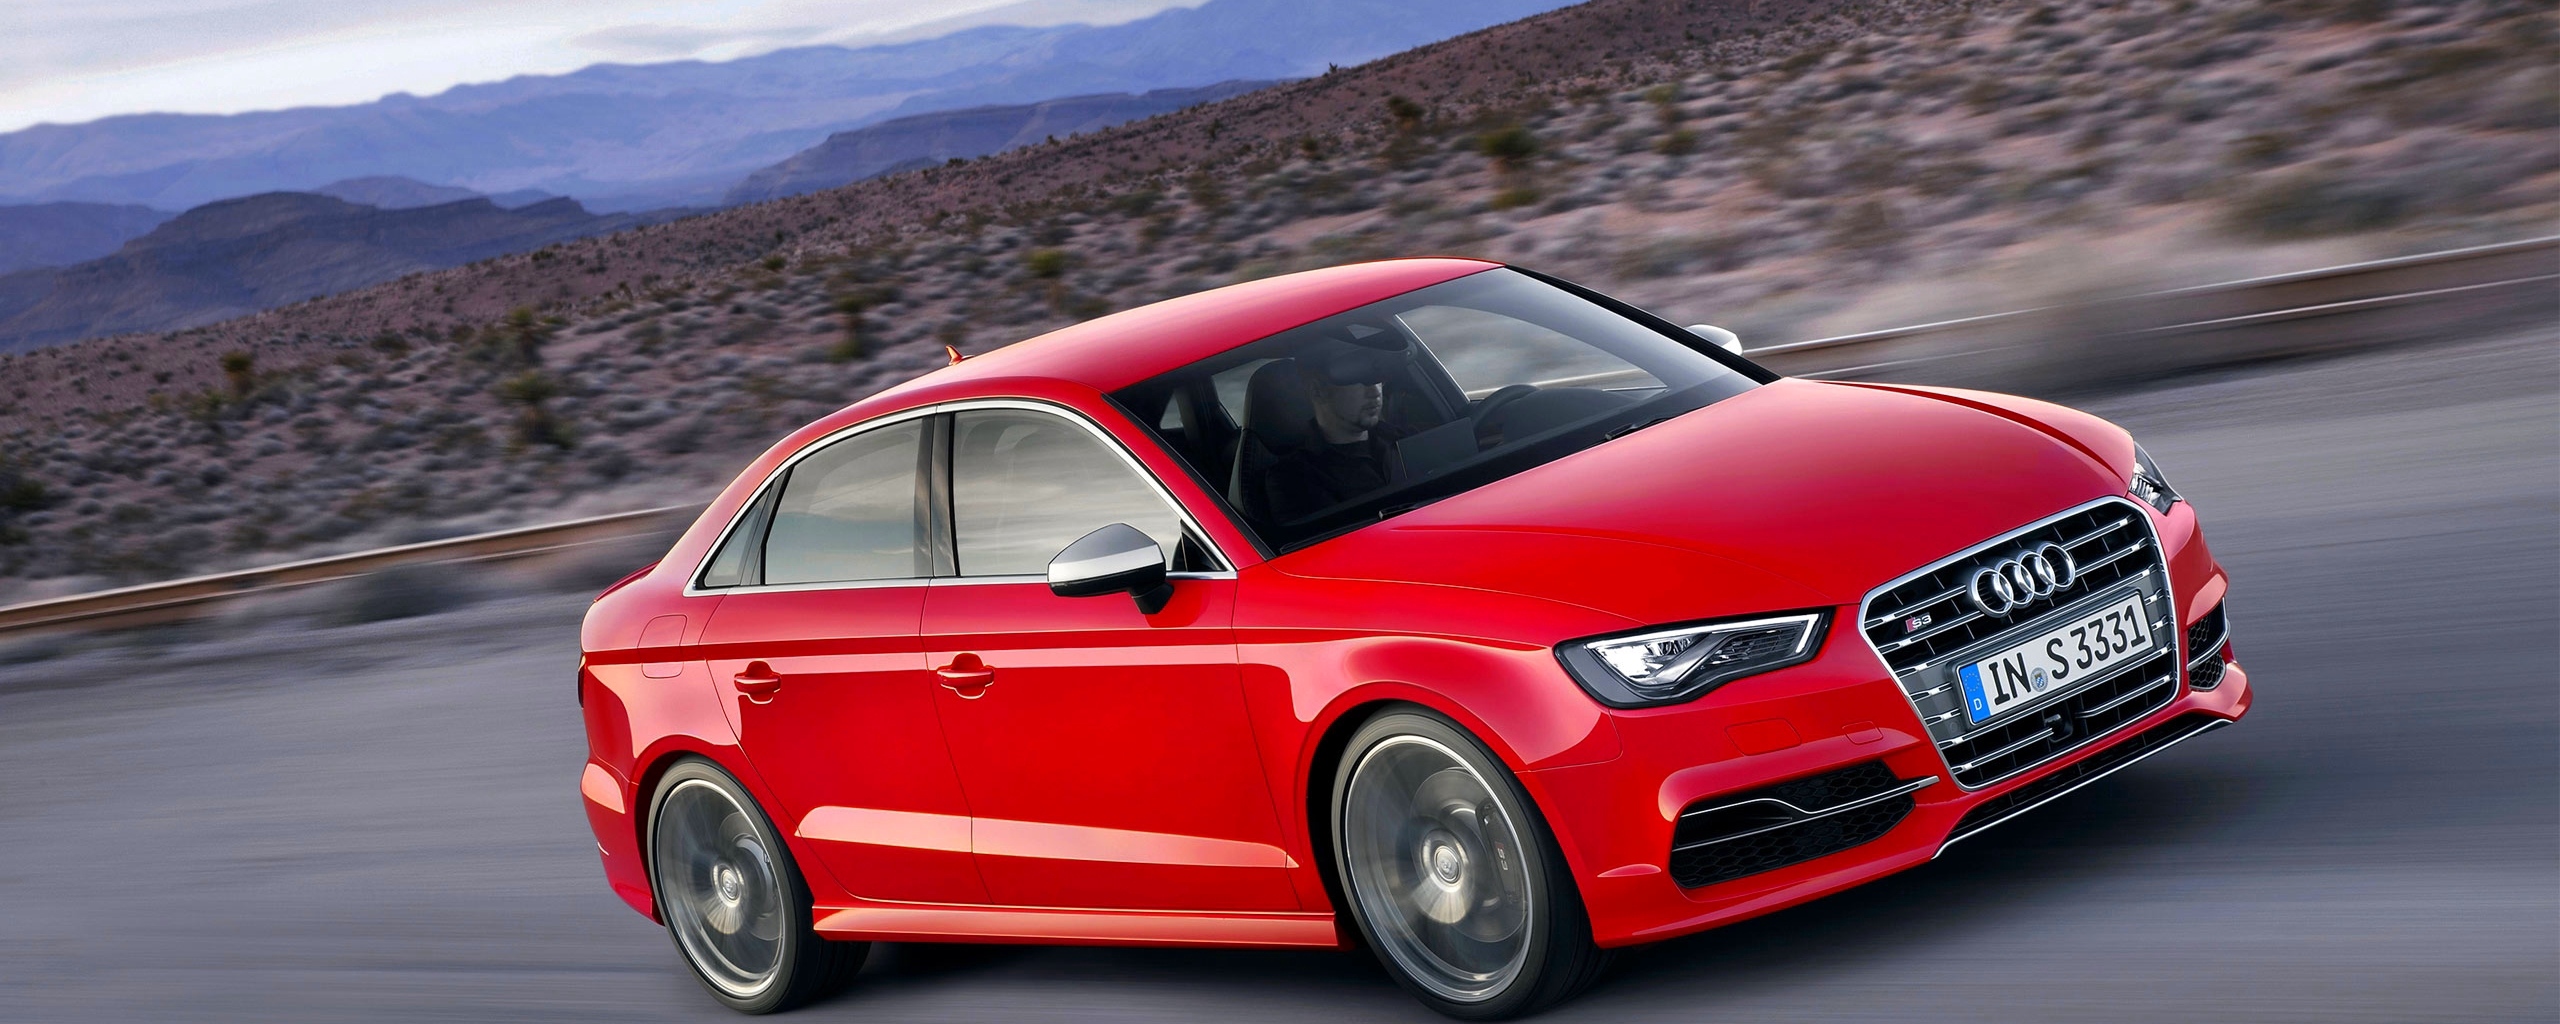 Download wallpaper 2560x1024 audi s3 red side view ultrawide 2560x1024